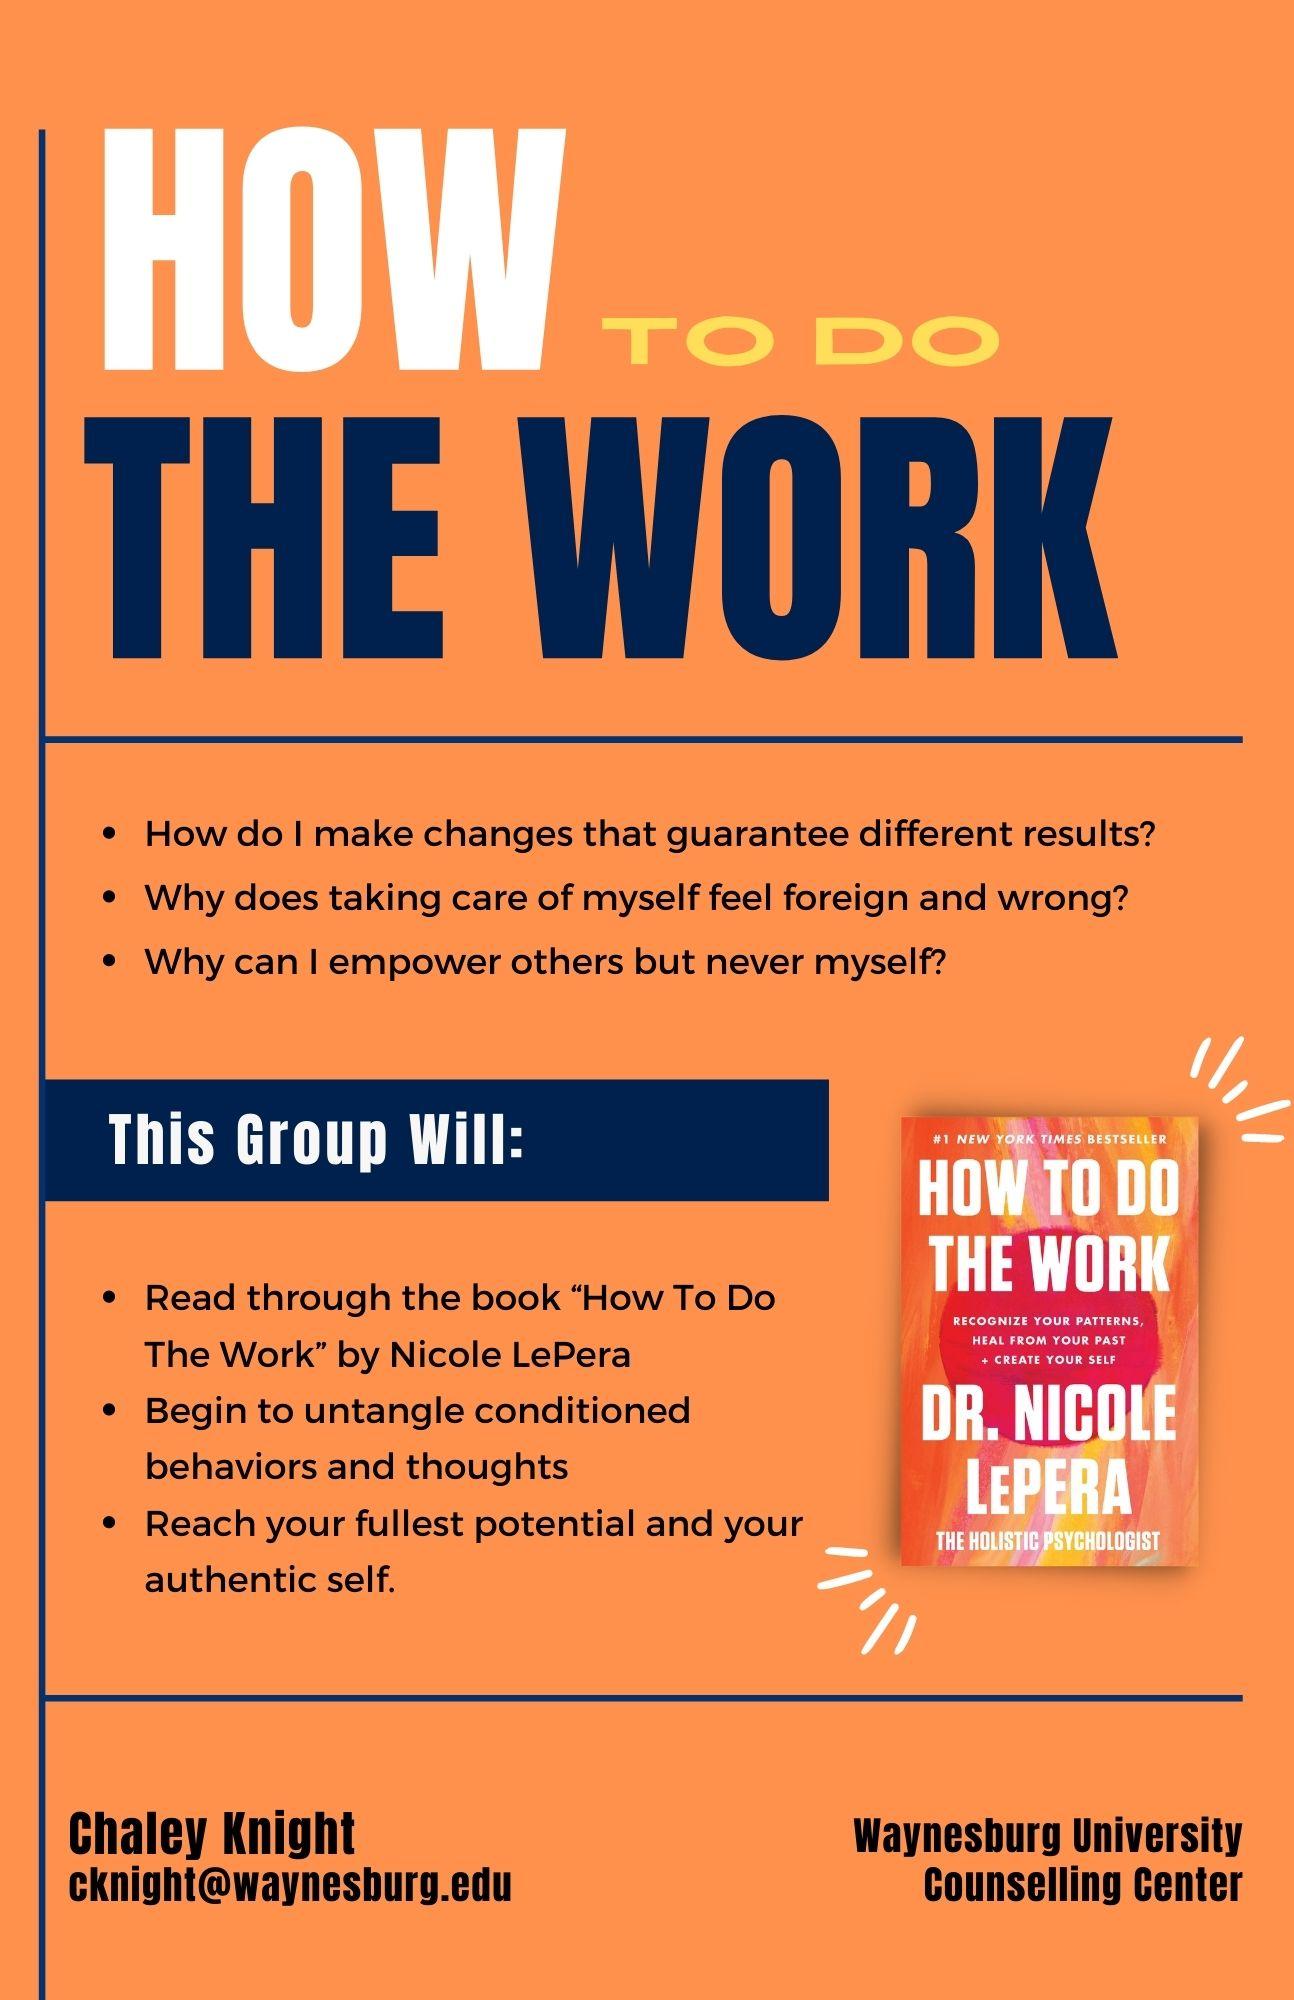 how to do the work group flyer